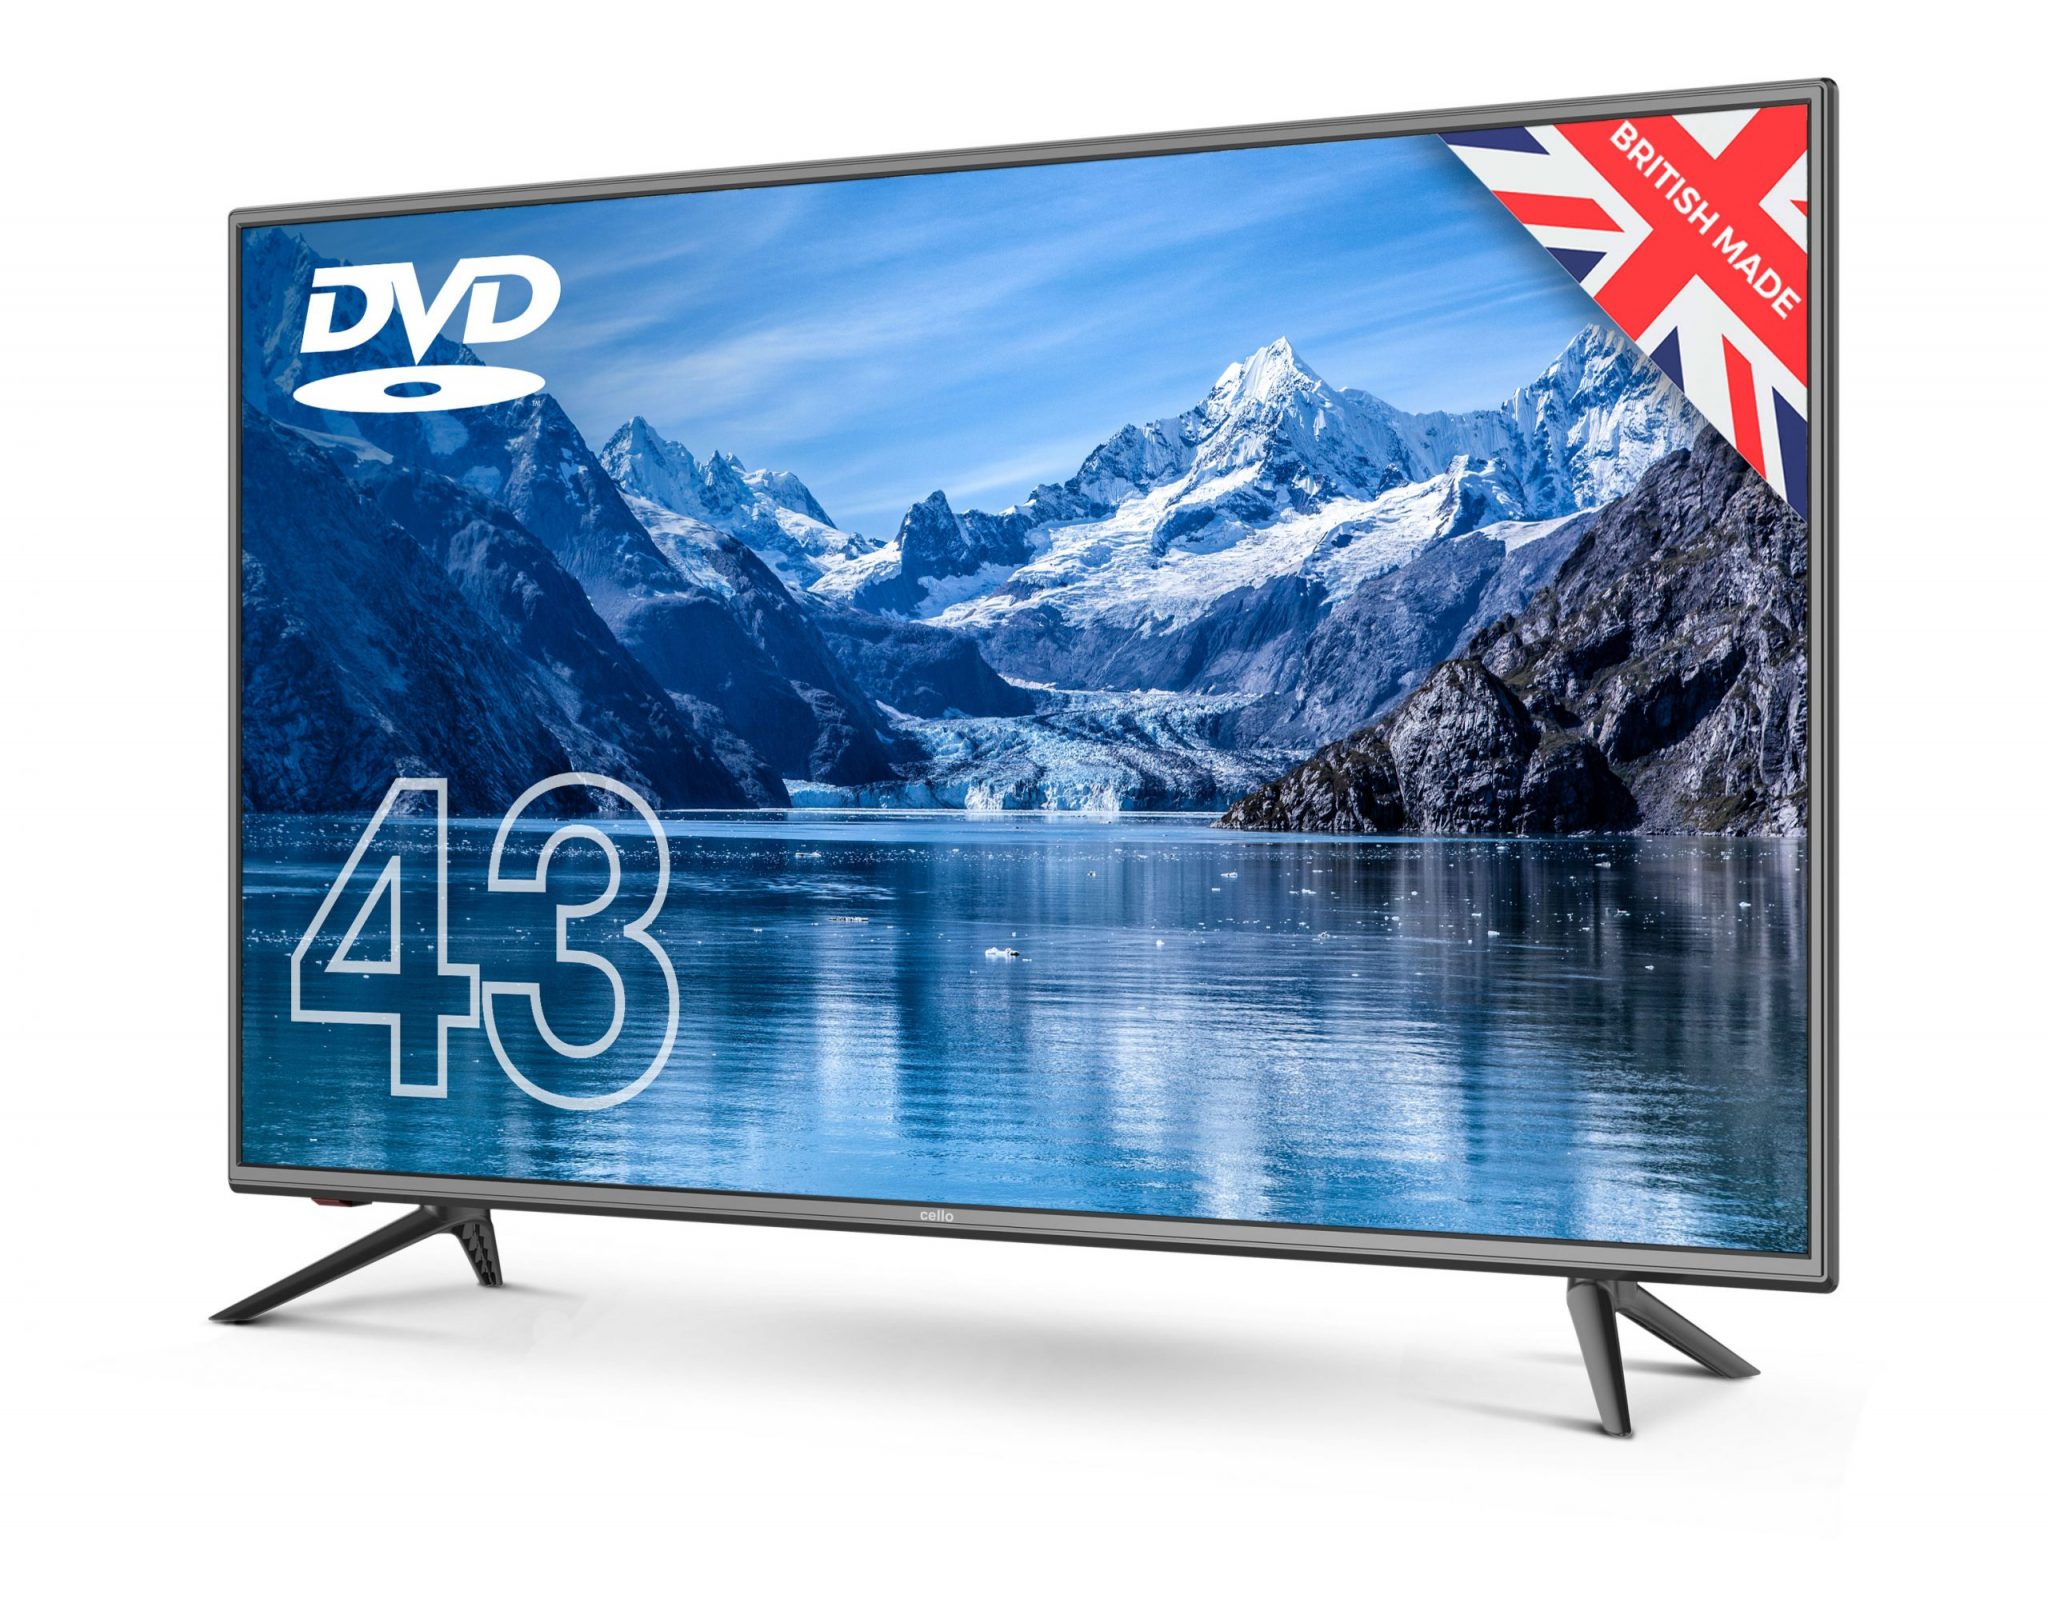 Cello C4320F 43 inch Full HD LED TV With DVD Player and Freeview T2 HD